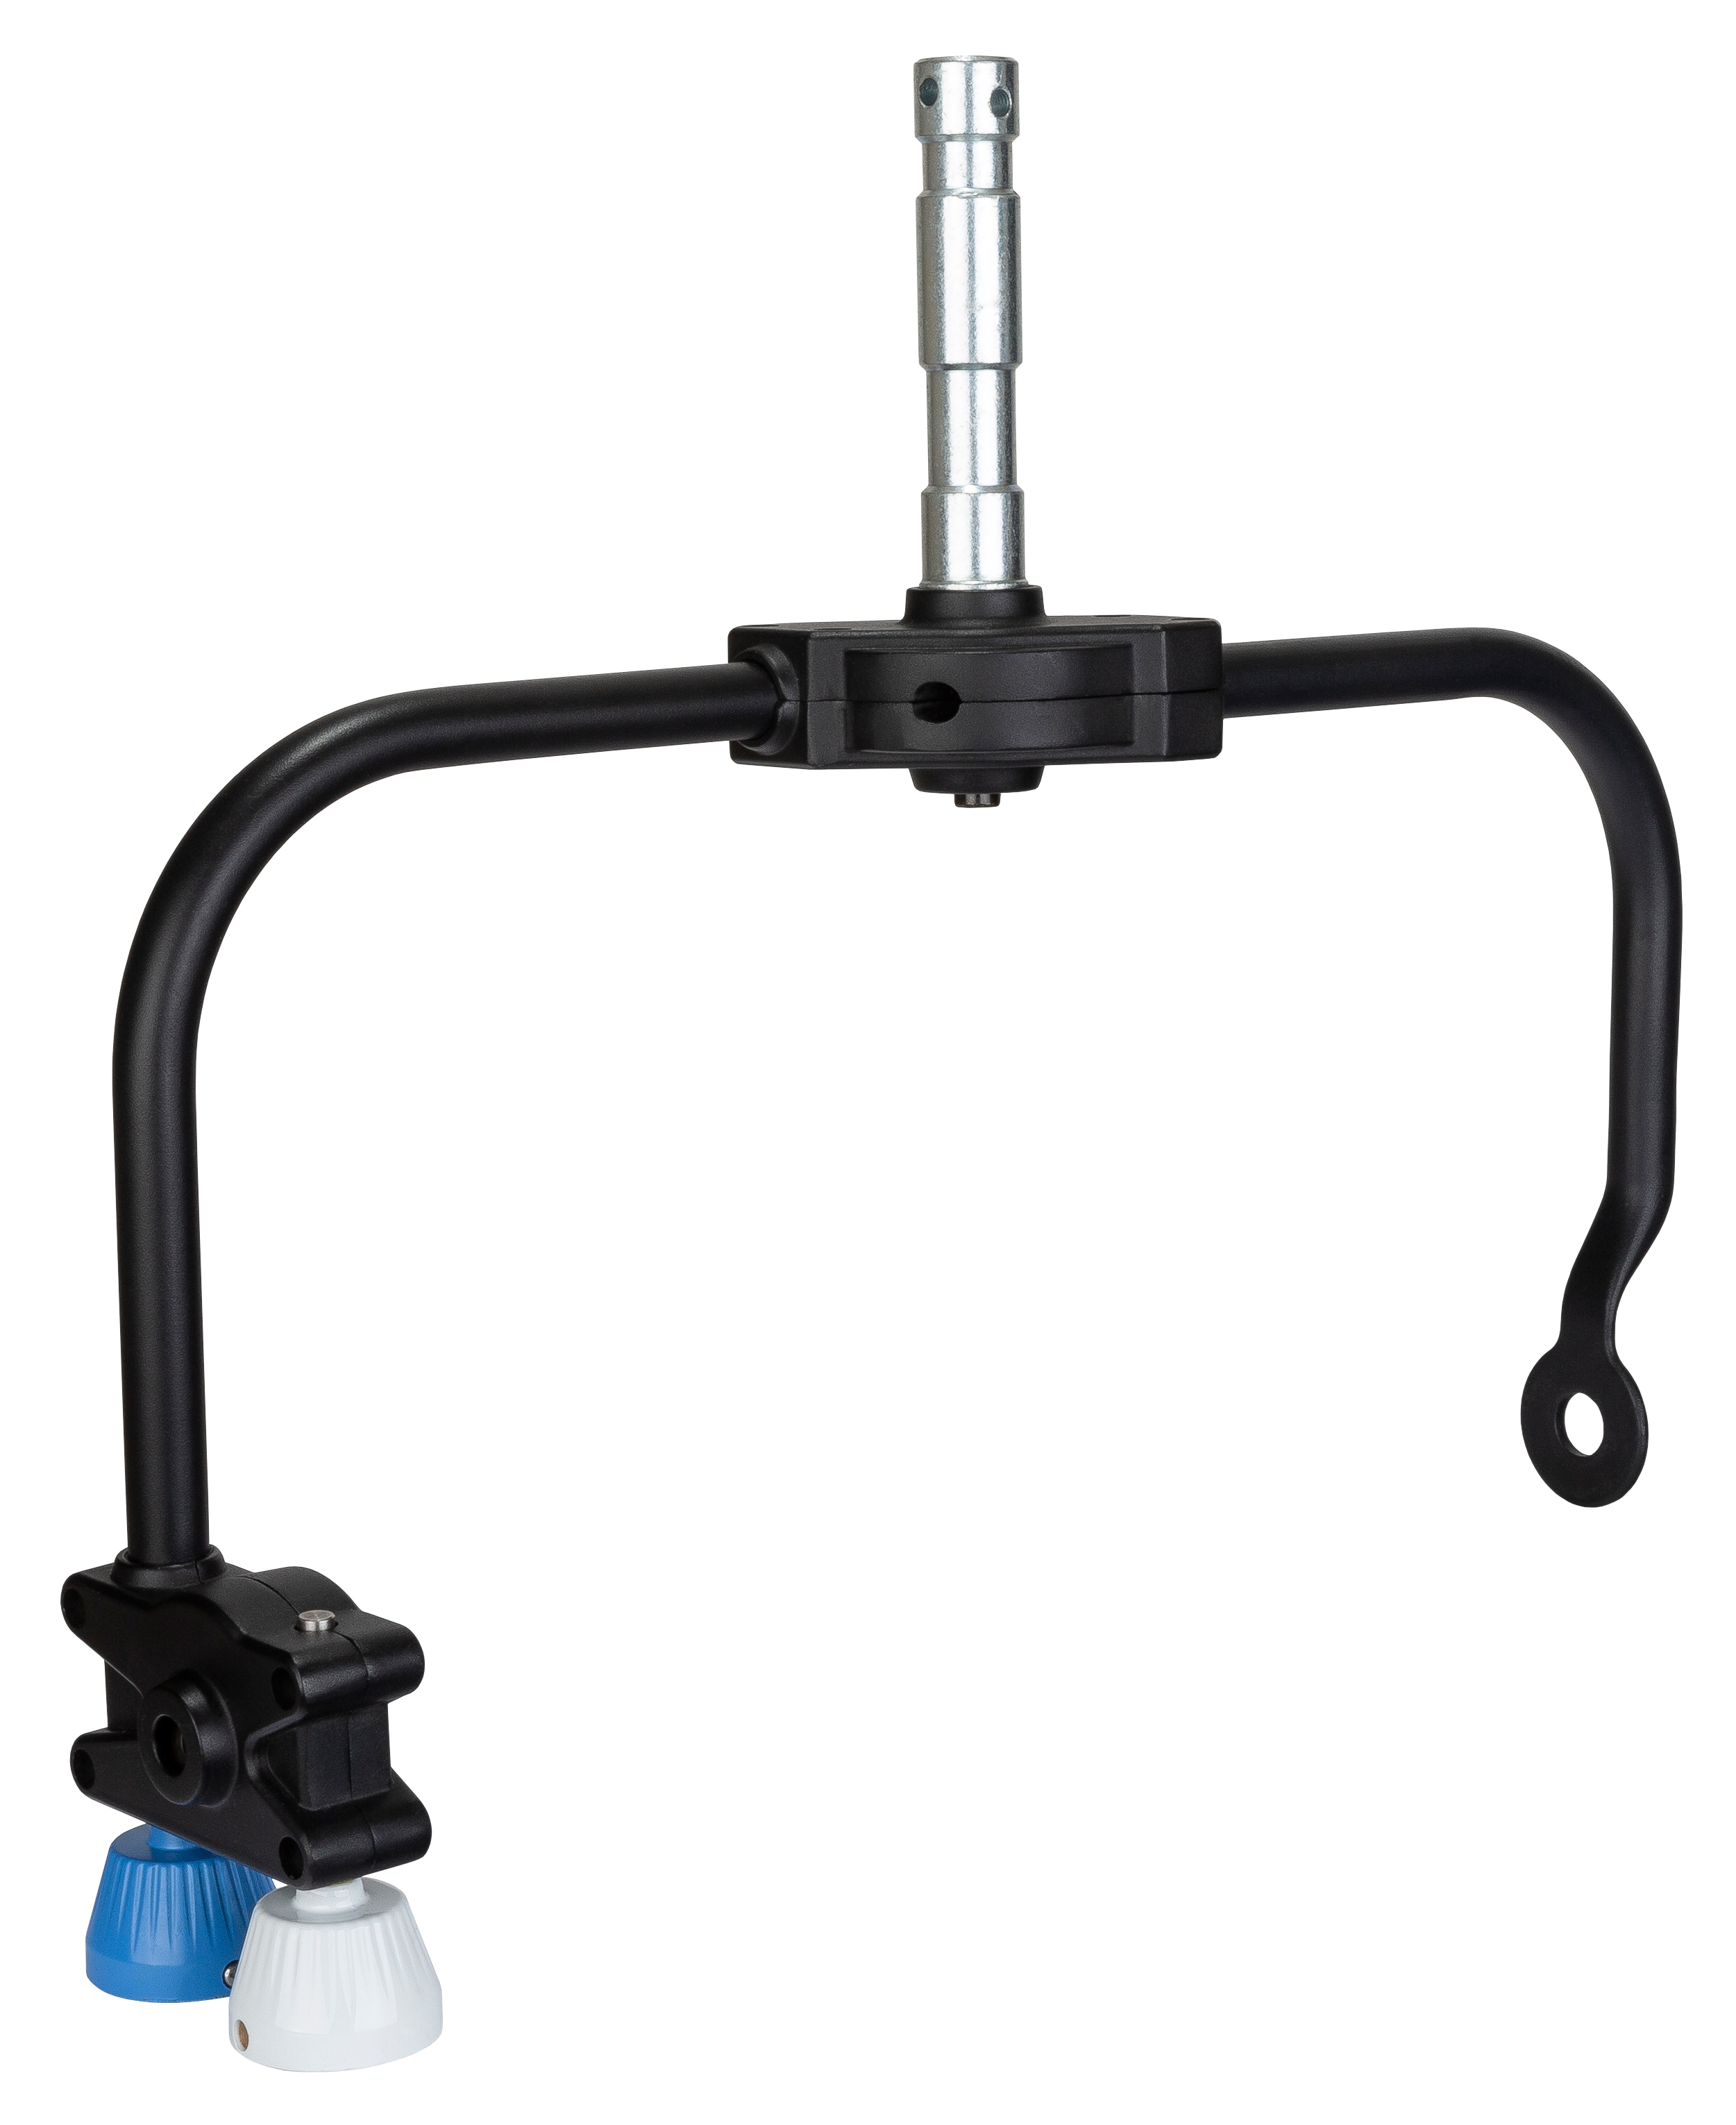 For easy and fast alignment of the BT-TVPANEL in high TV studios the standard hanging bracket can be replaced by this optionally available BT-TVPANEL YOKE